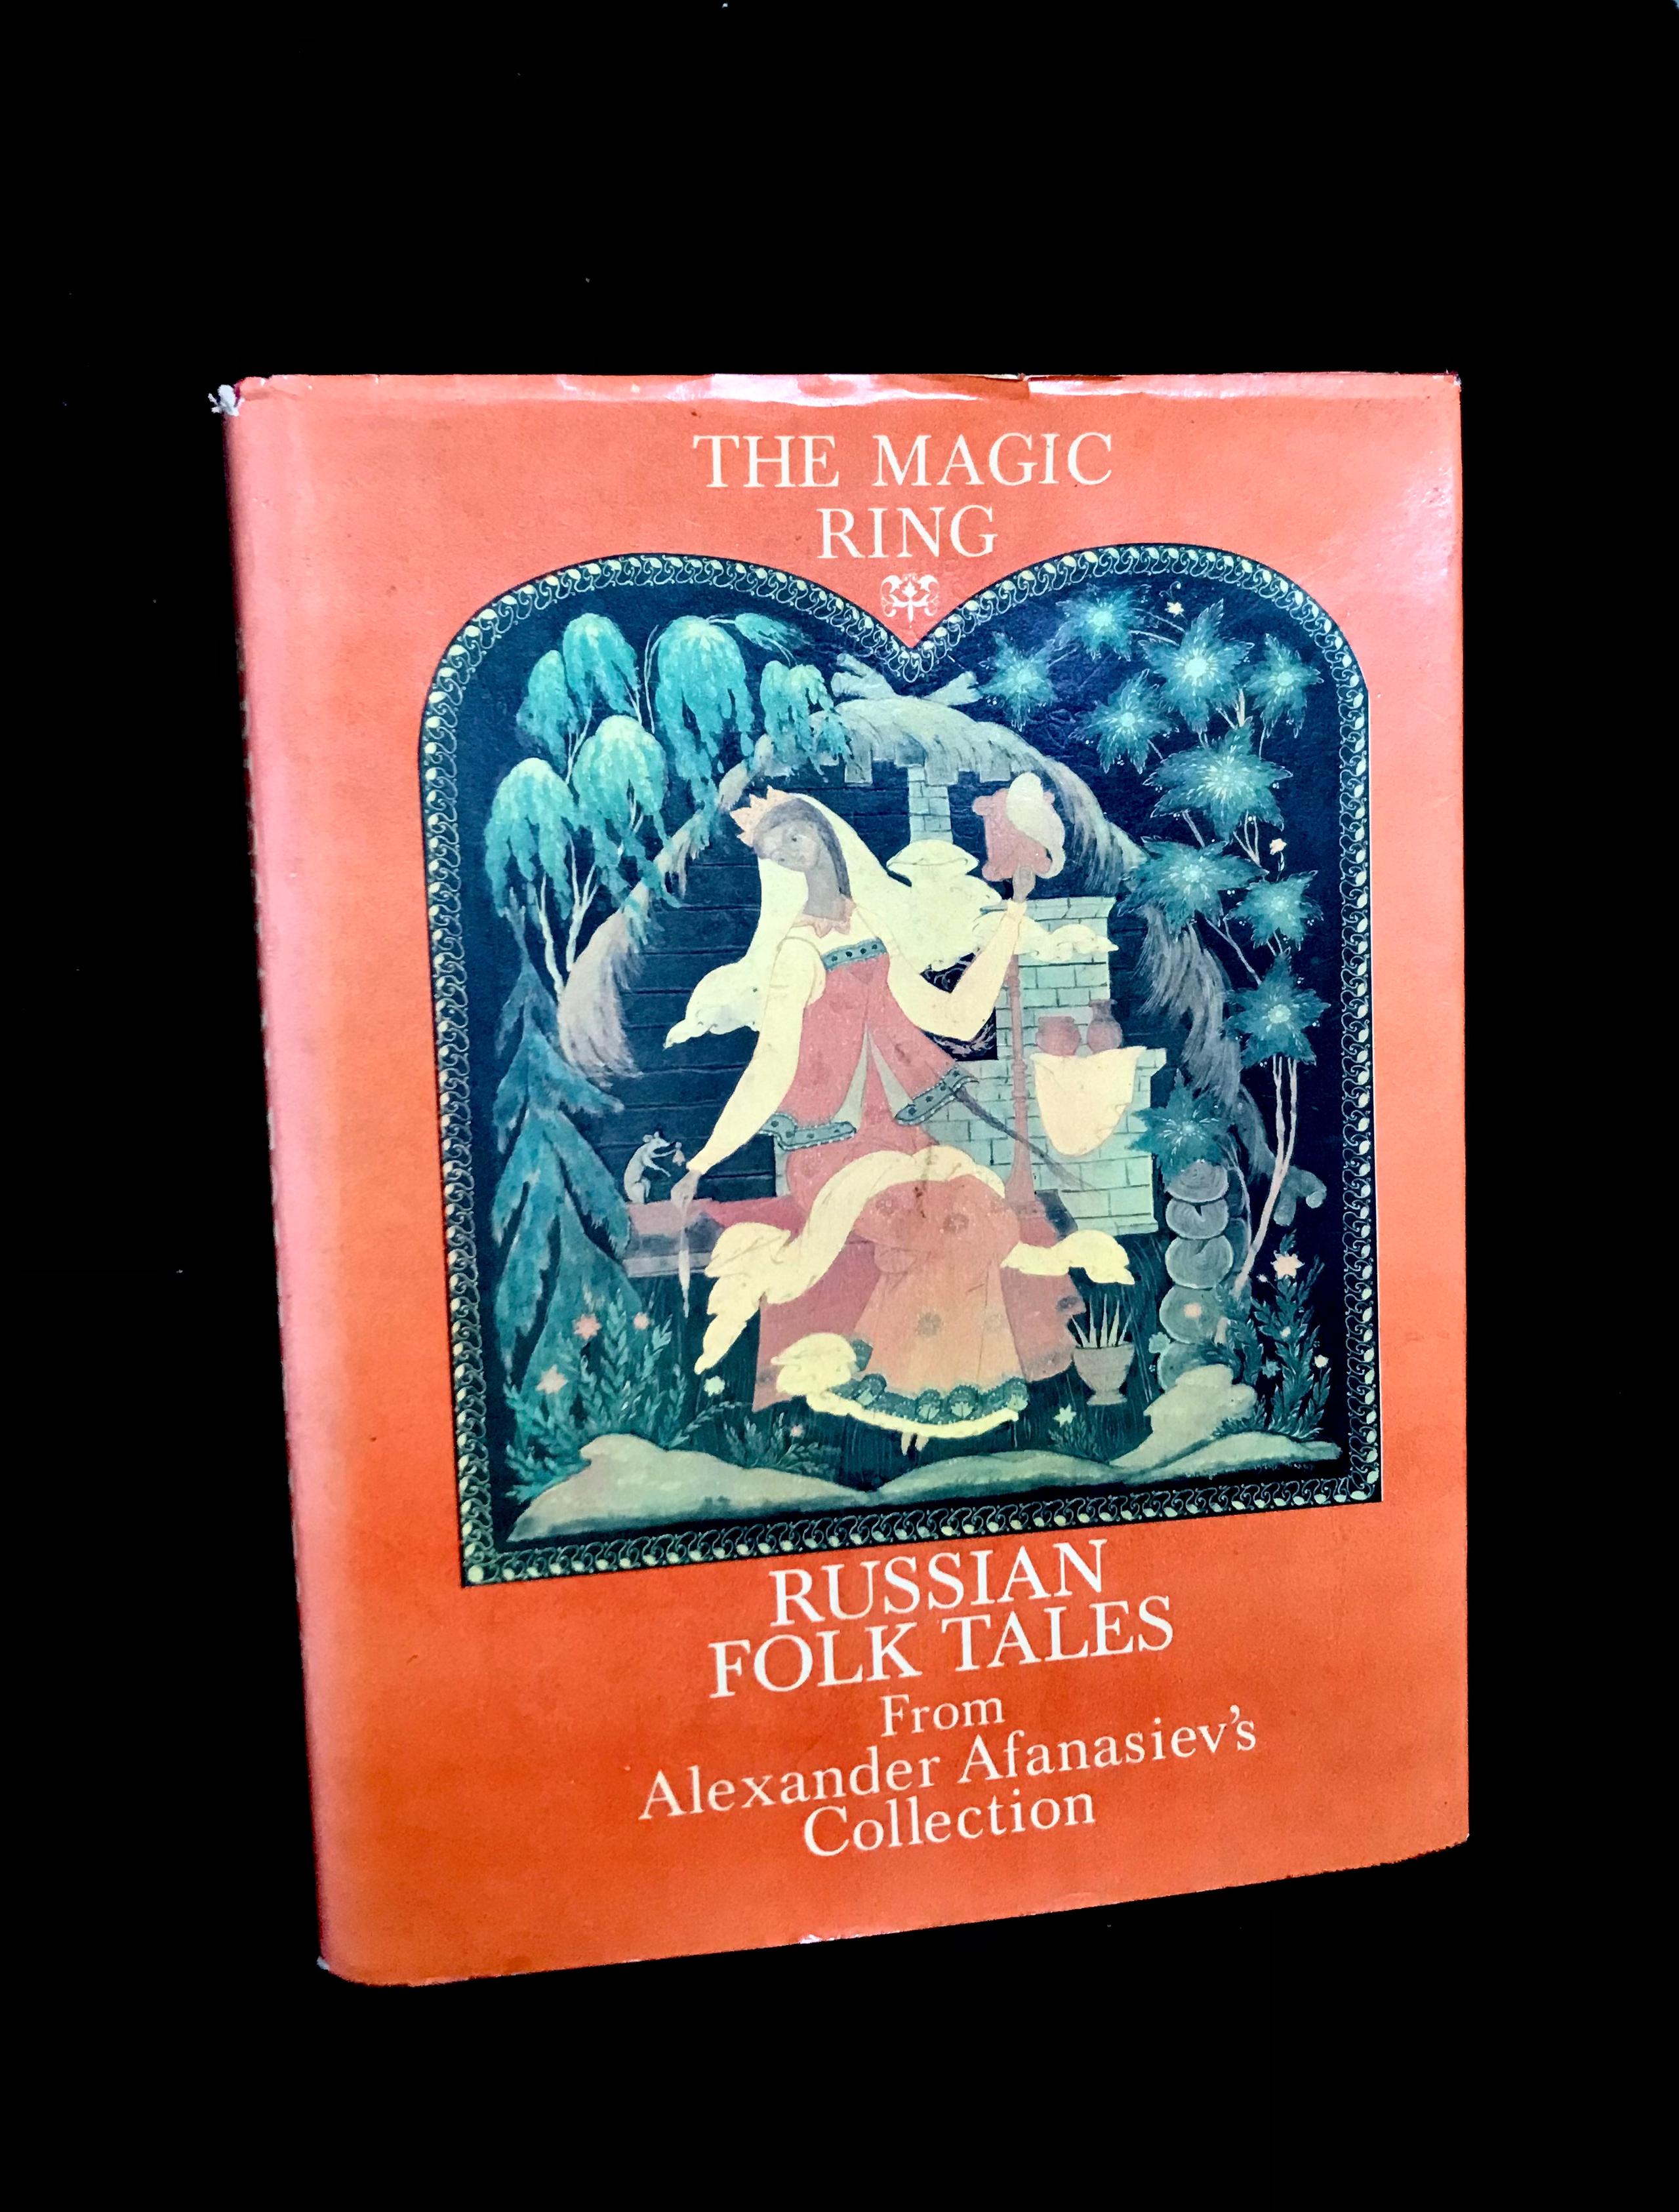 The Magic Ring: Russian Folk Tales from Alexander Afanasiev's Collection